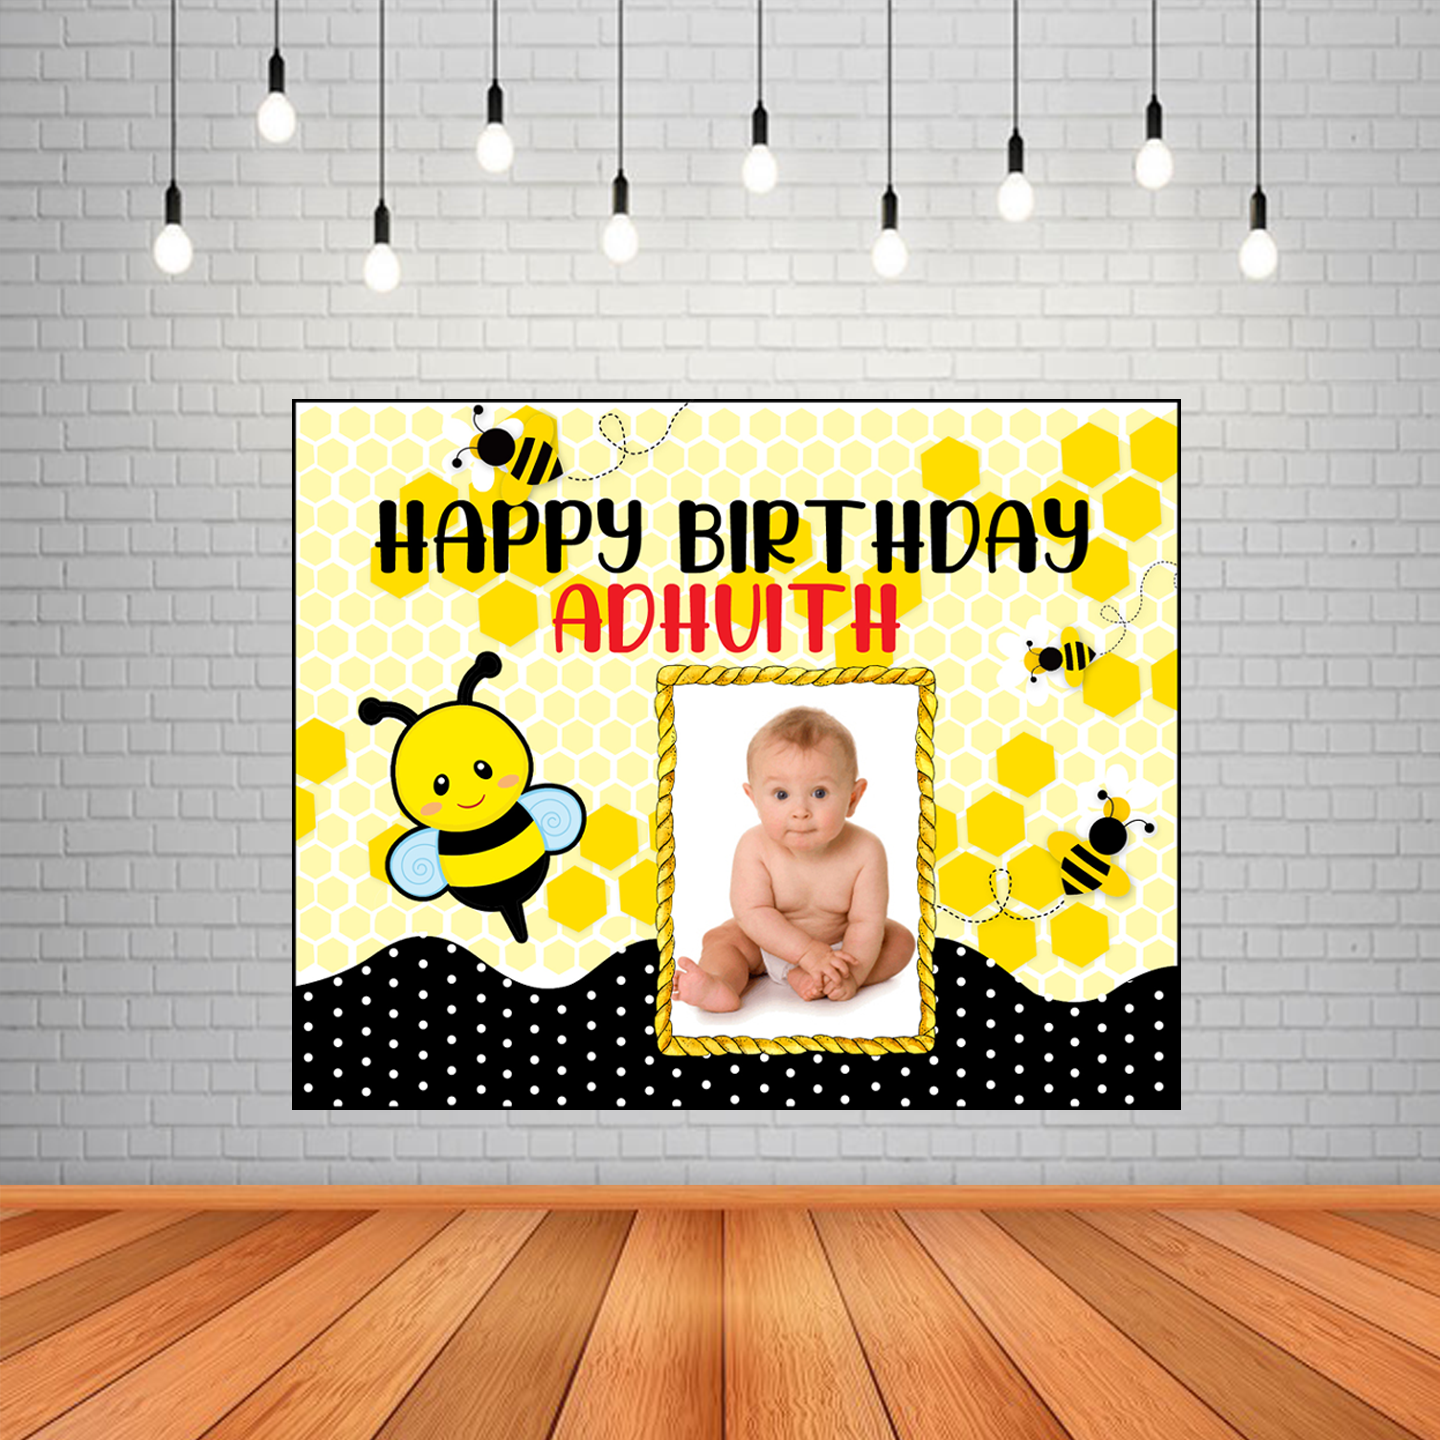 Honey Bee Backdrop / Background Banner With Baby Picture (4ft x 5ft)